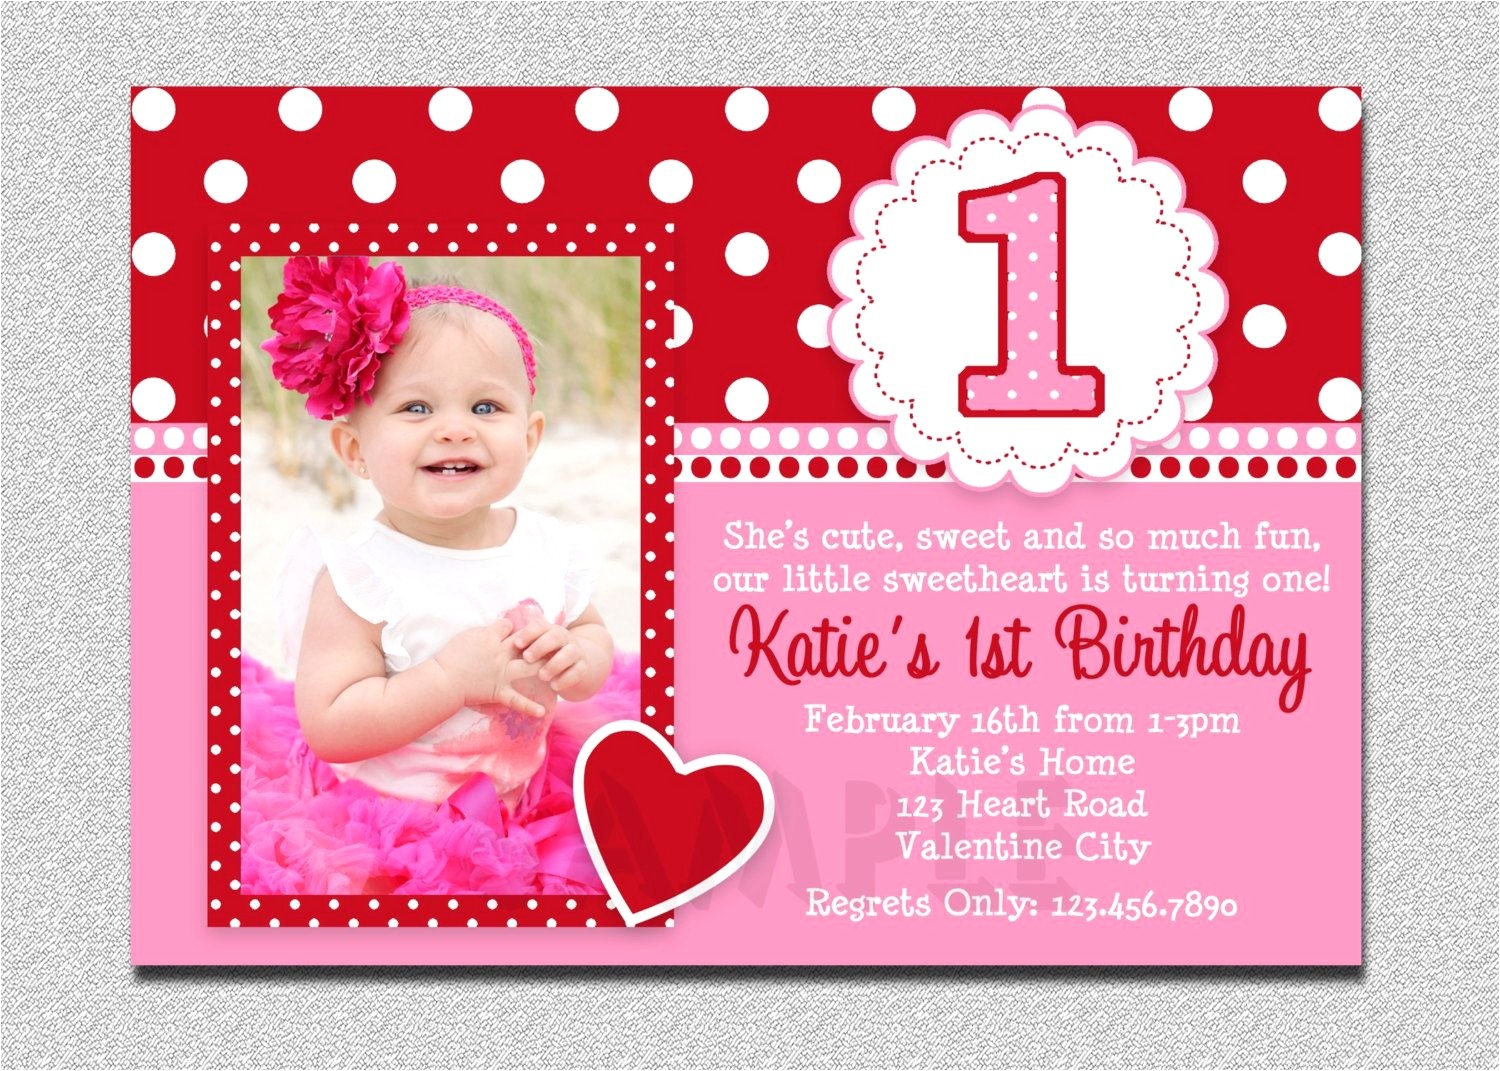 sample of birthday invitation cards 1 year old beautiful birthday invitation cards birthday invitation cards format new